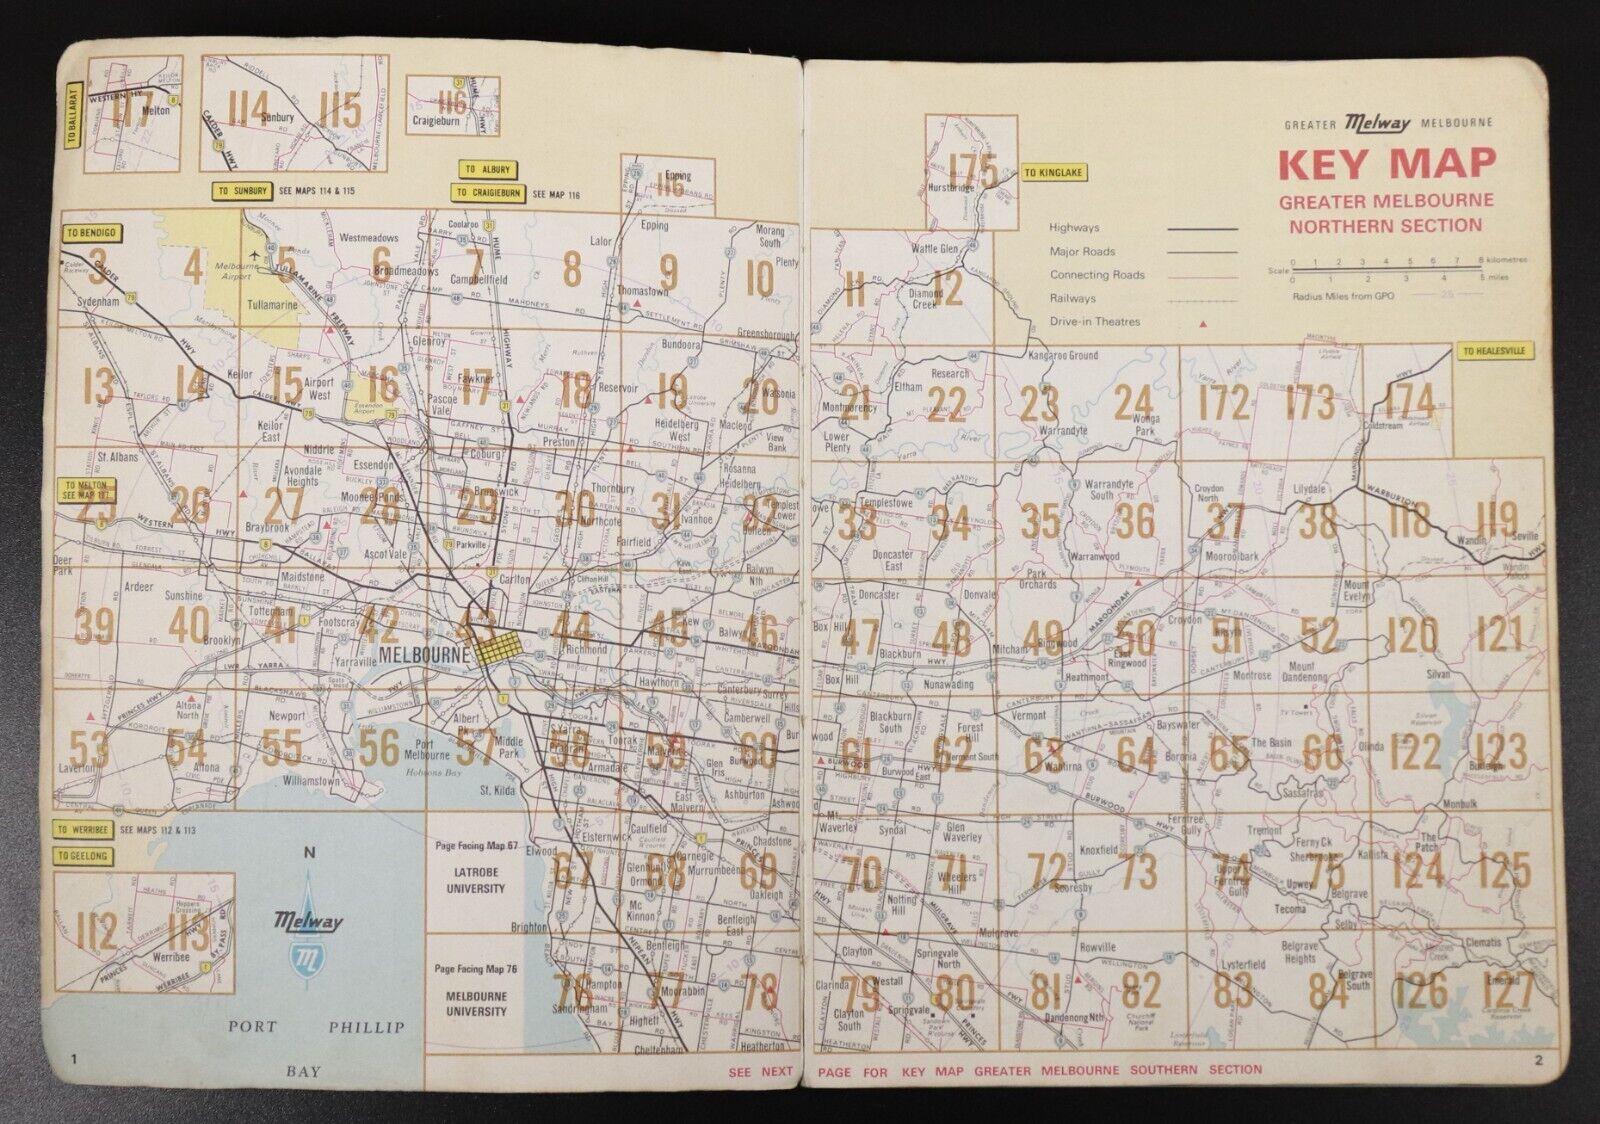 1974 Melway Street Directory Of Greater Melbourne Maps Book Melways 7th Edition